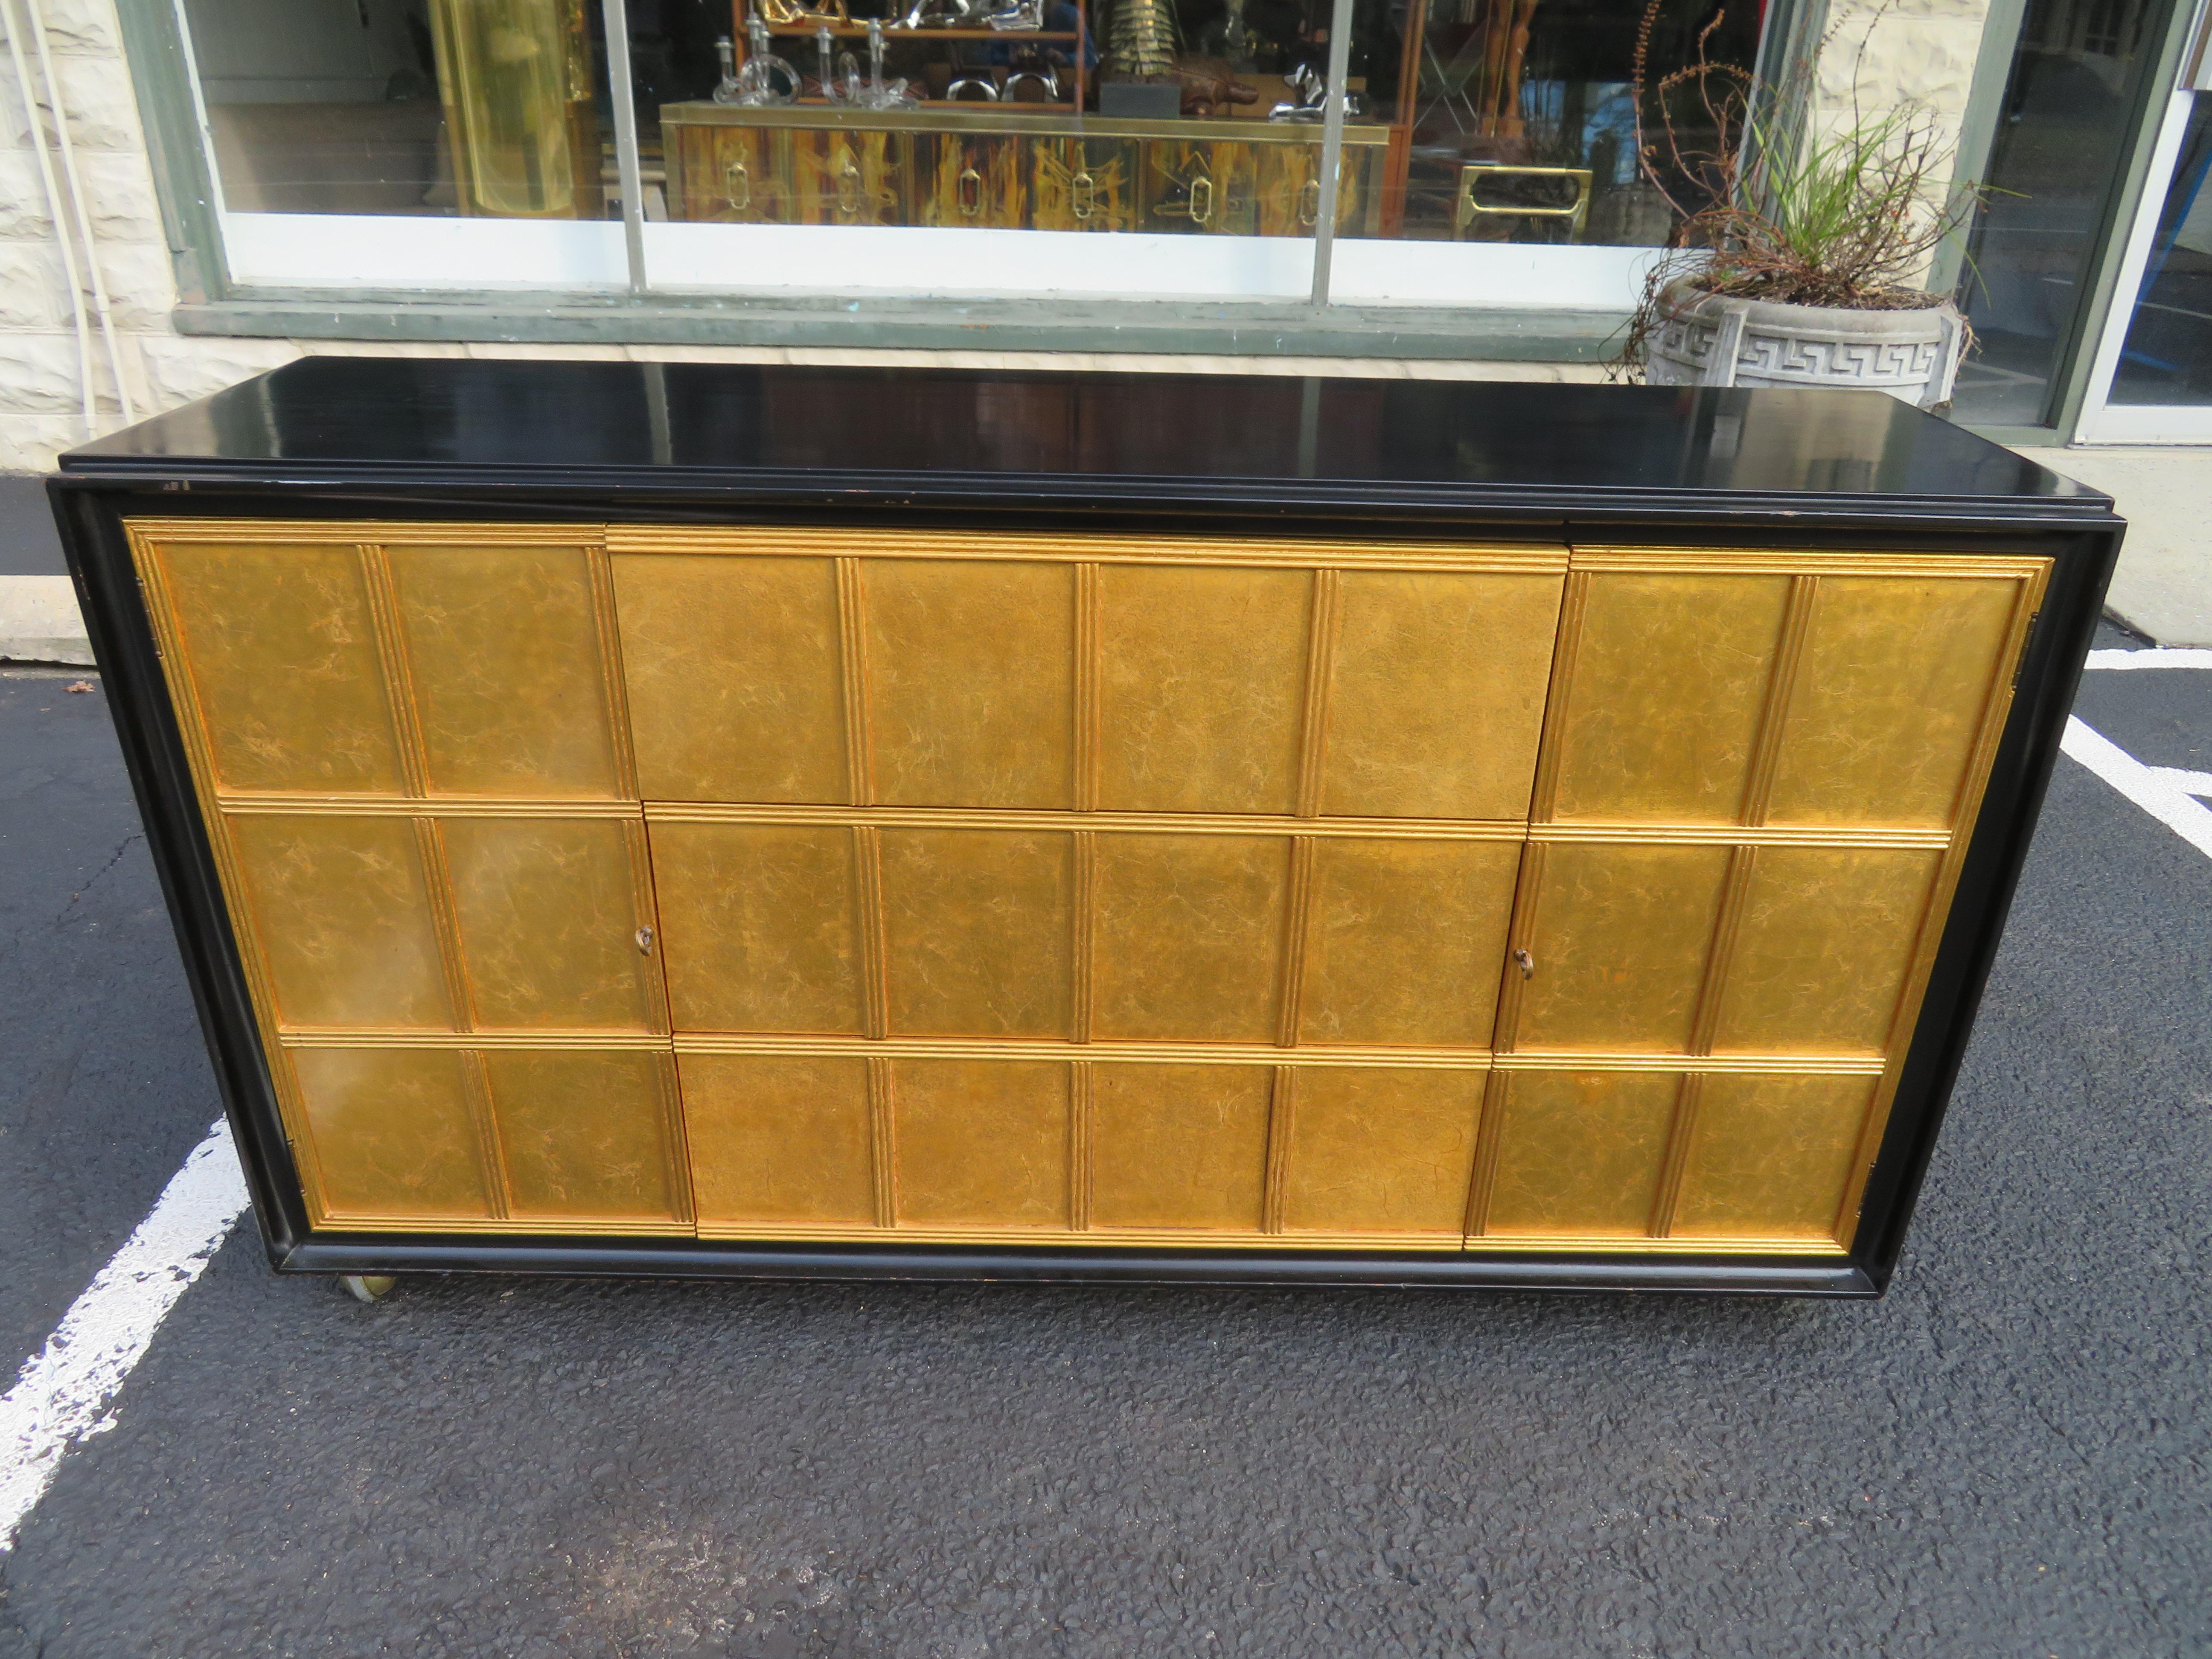 Lovely Dorothy Draper Style Gold Leaf Front Buffet Credenza Mid-Century Modern 12